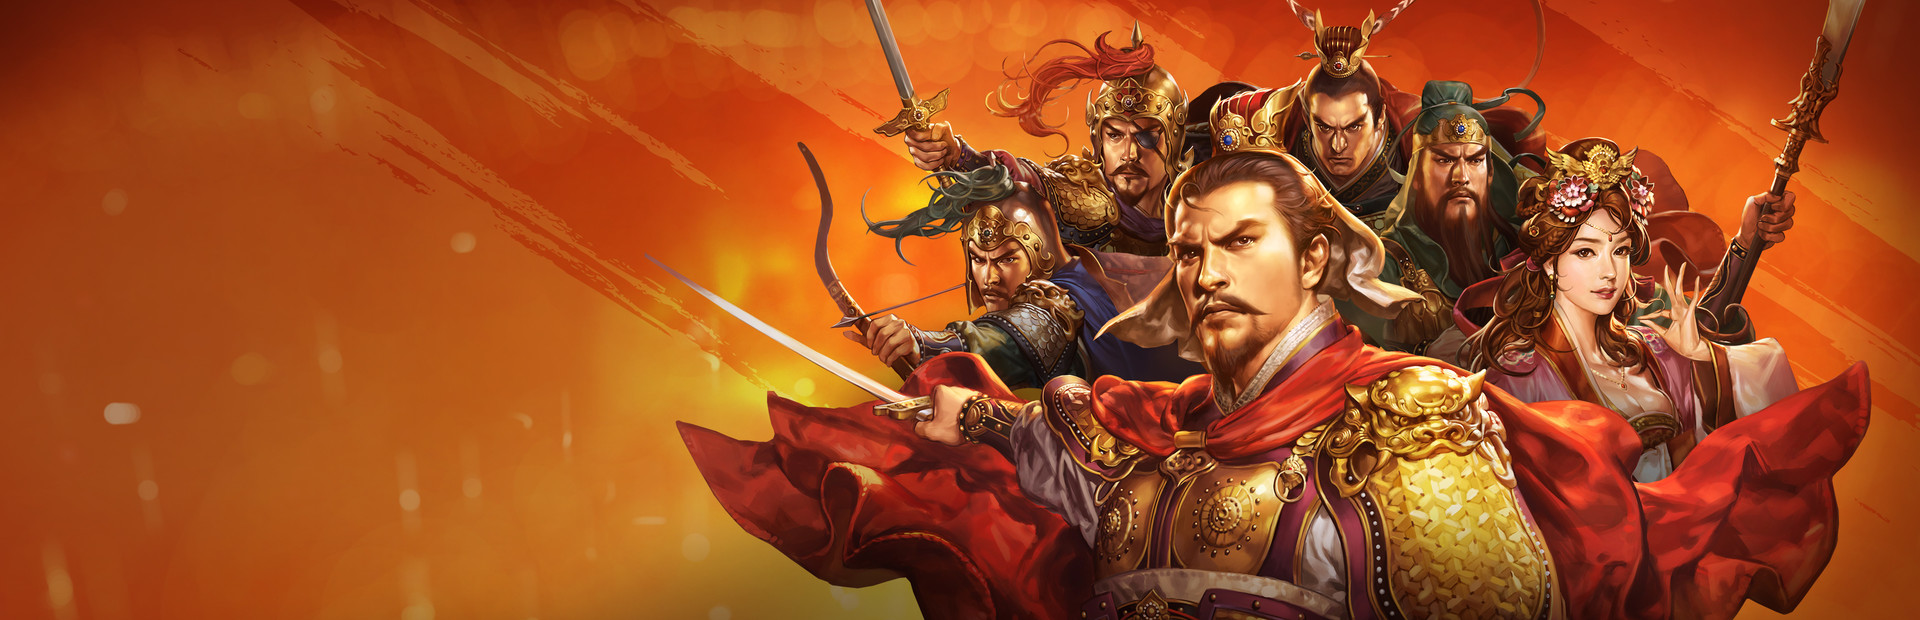 Romance of the Three Kingdoms : The Legend of CaoCao(Tactics) cover image